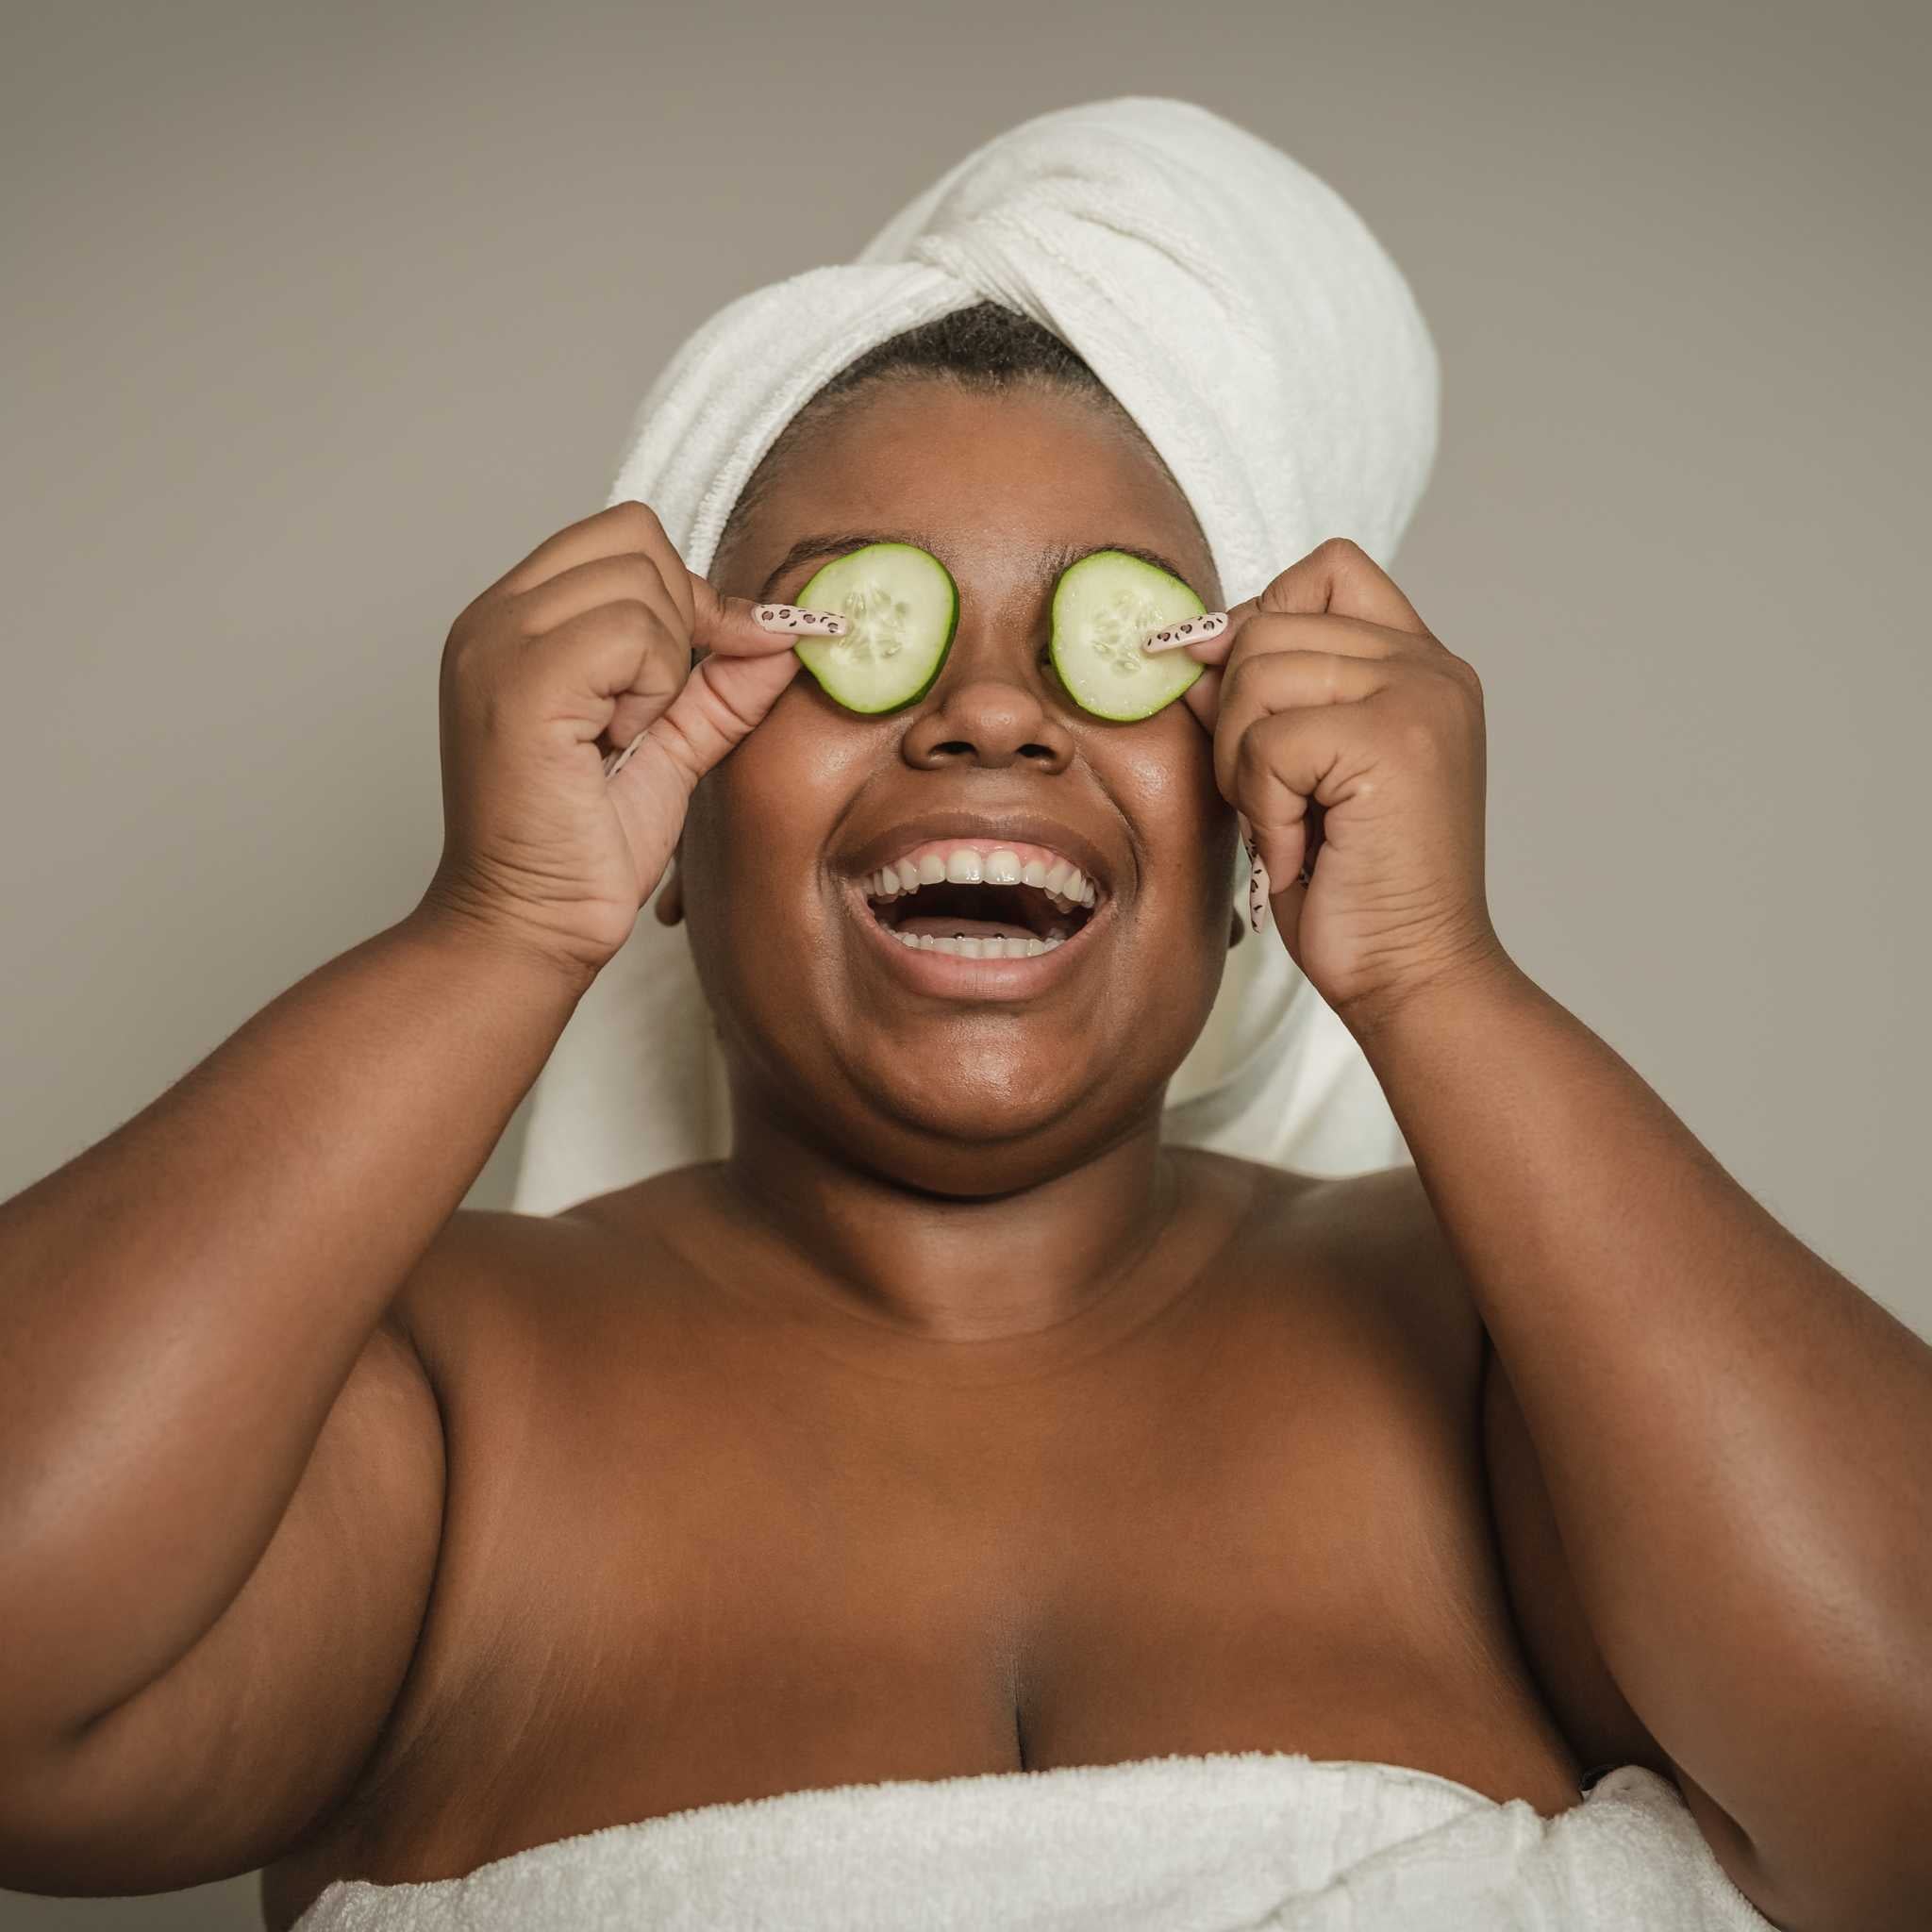 Woman practising self-care by putting cucumber slices on her eyes.